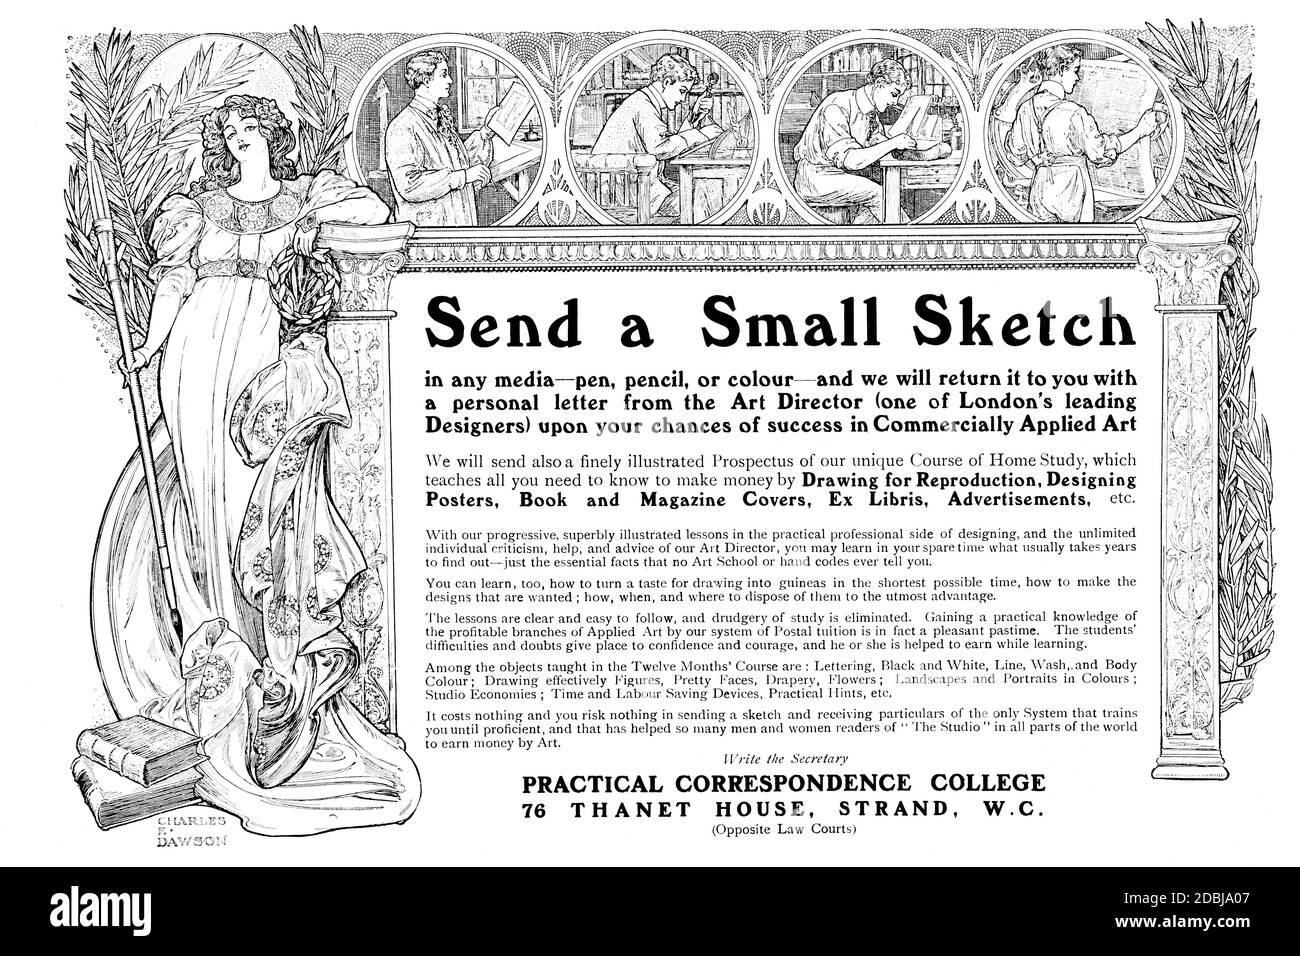 Ill758Send a small sketch, advertisement for the Practical Correspondence College, course from 1912 The Studio an Illustrated Magazine of Fine and Ap Stock Photo